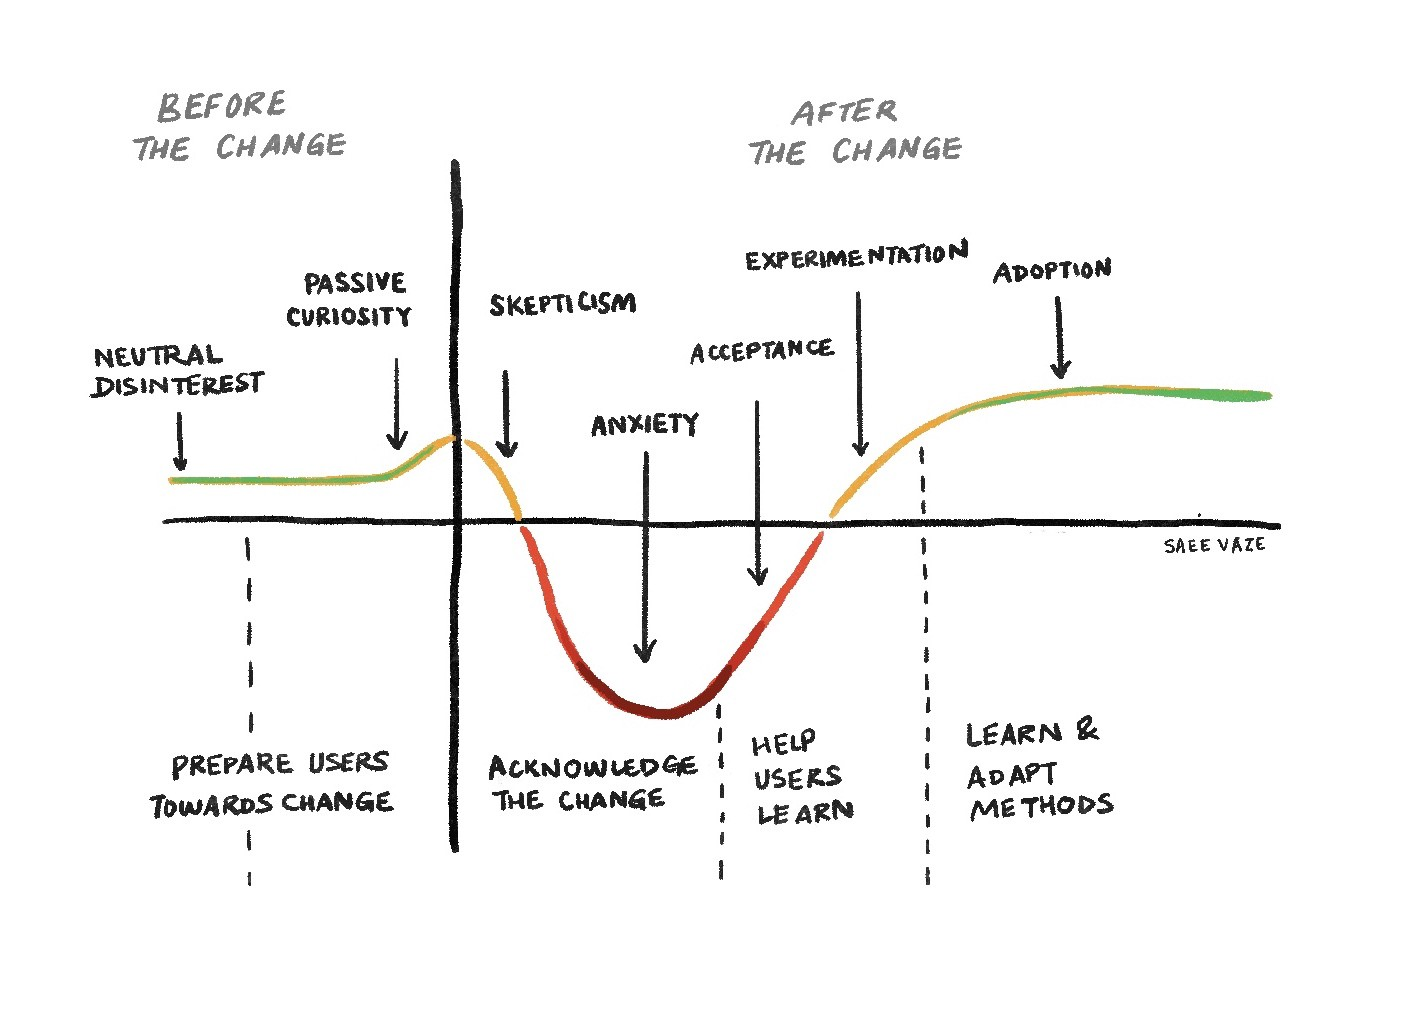 A diagram showing how users’ emotions dip to negative for some time right after a change is introduced to them.